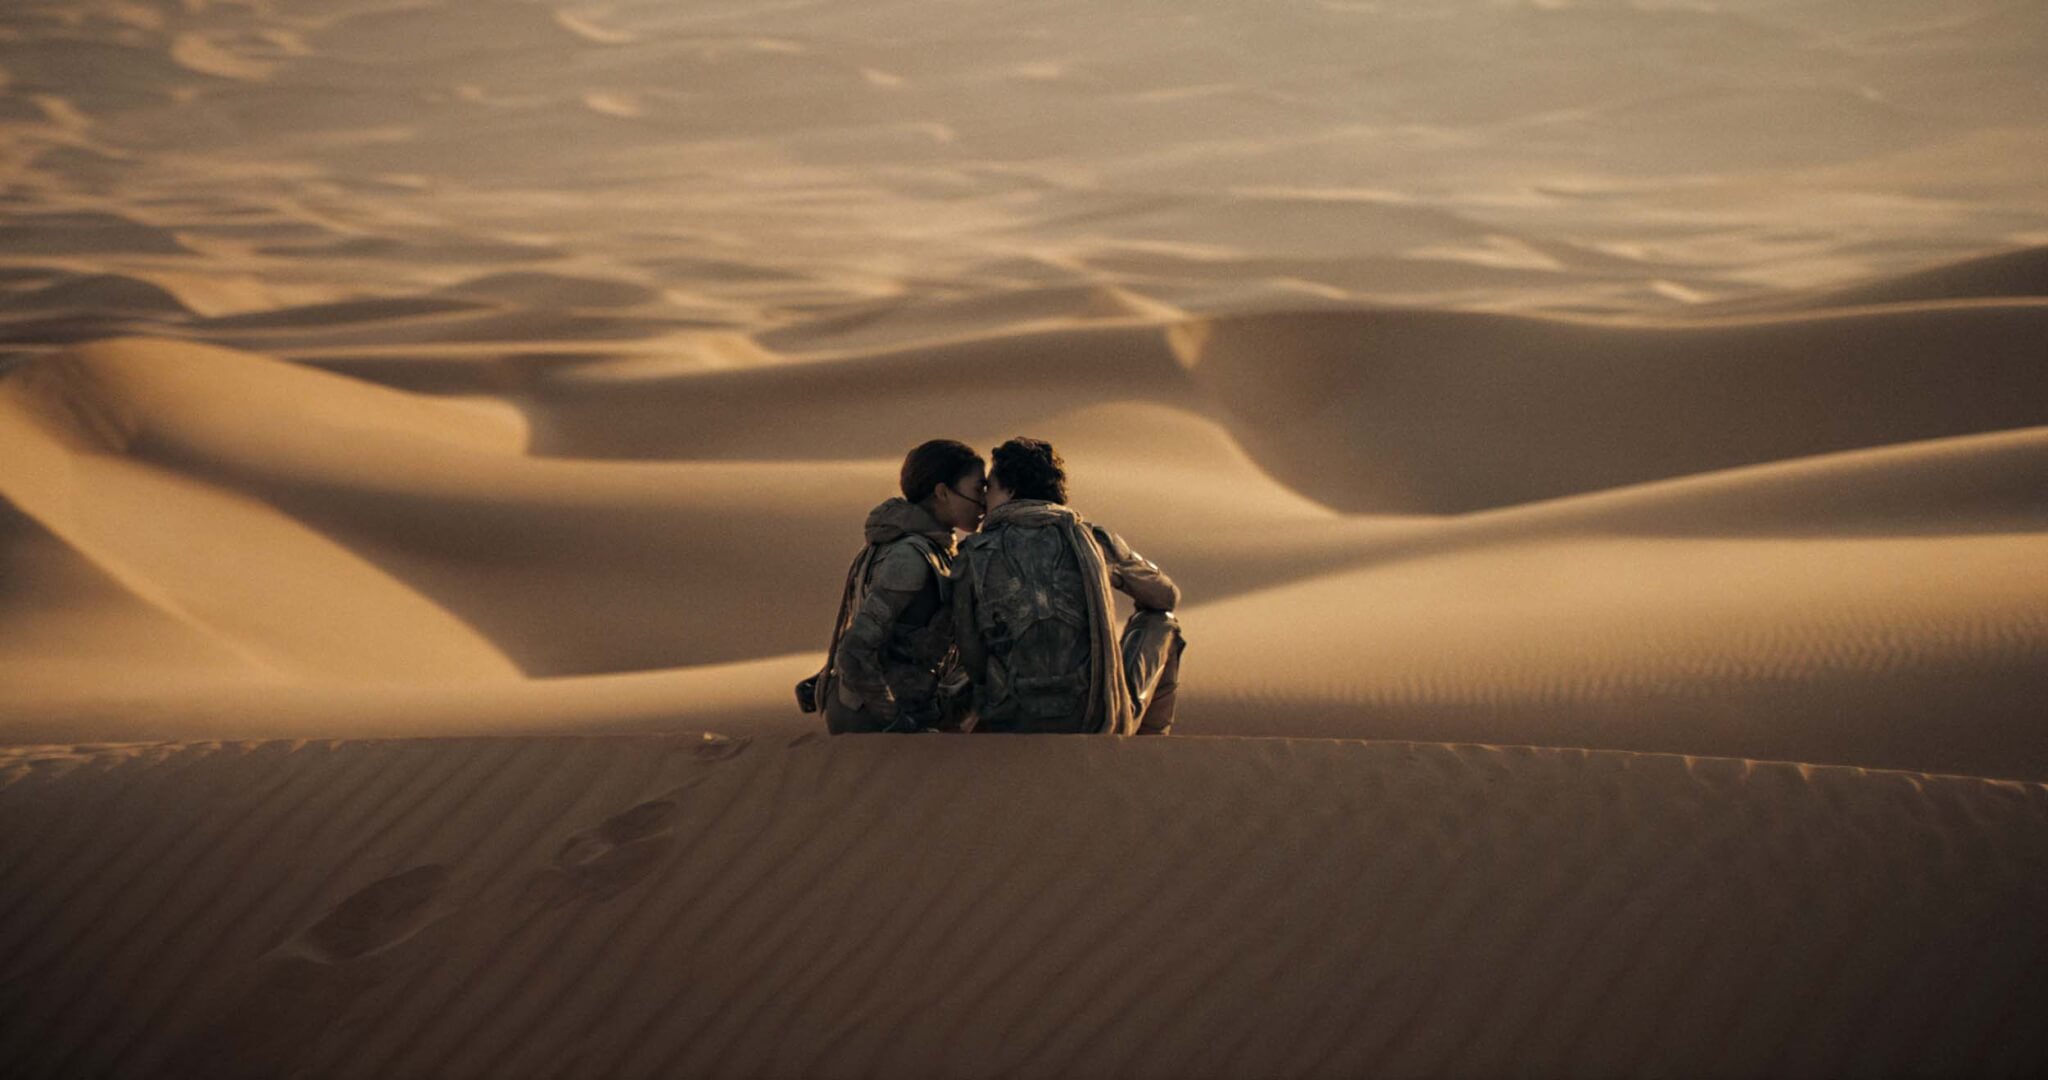 Chani and Paul Atreides in Dune: Part Two